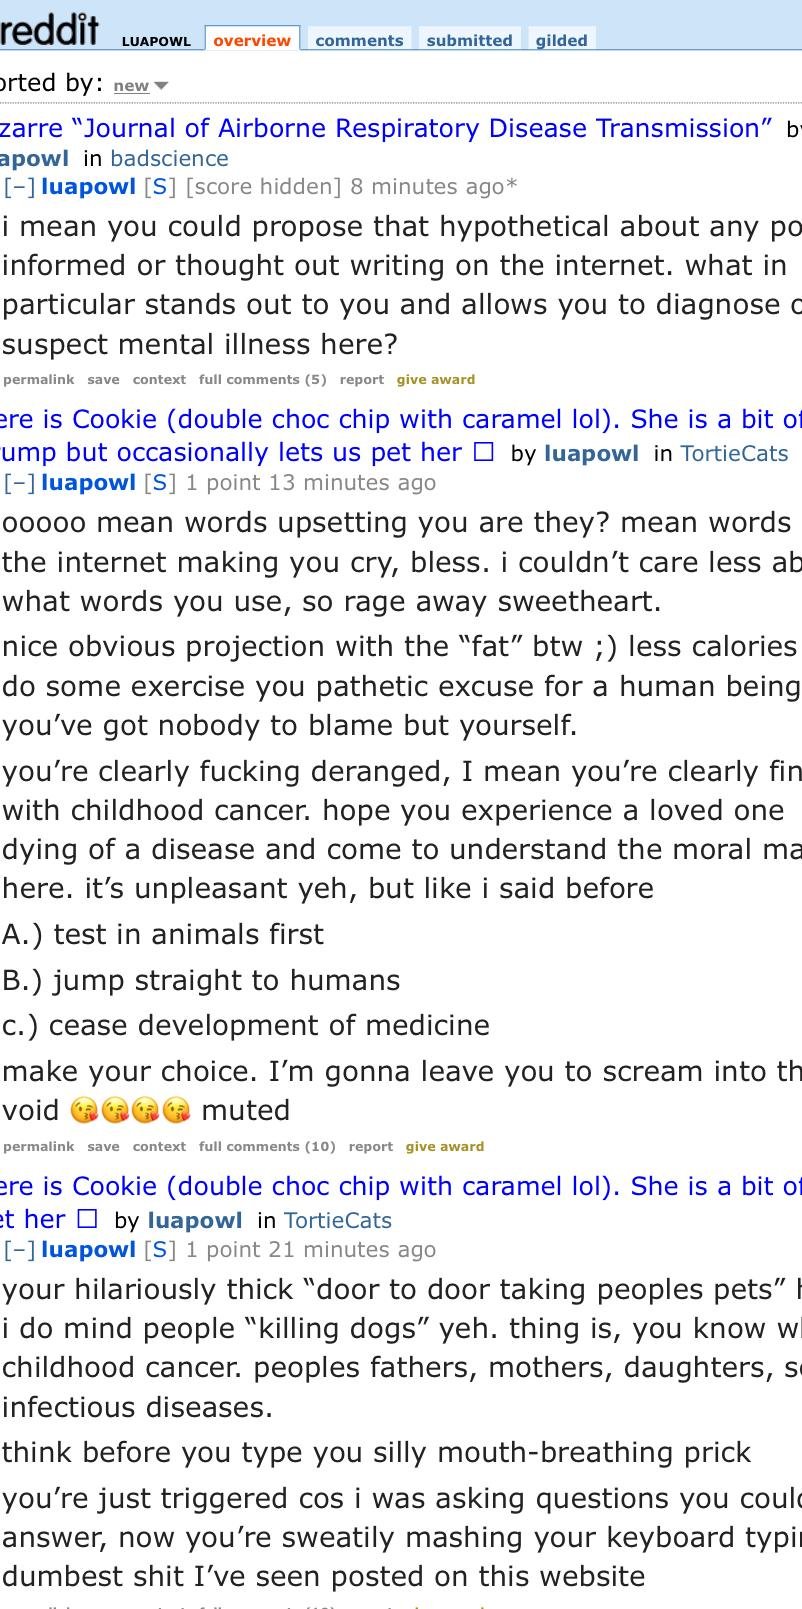 This libtard on Reddit (100% libtard pink haired cunt) was defending the testing on beagles. When someone asked the libtard if she would volunteer her cat for these experiments, the libtard when into rage personal attack mode. Gotta love Reddit. What a BITCH. – The Donald